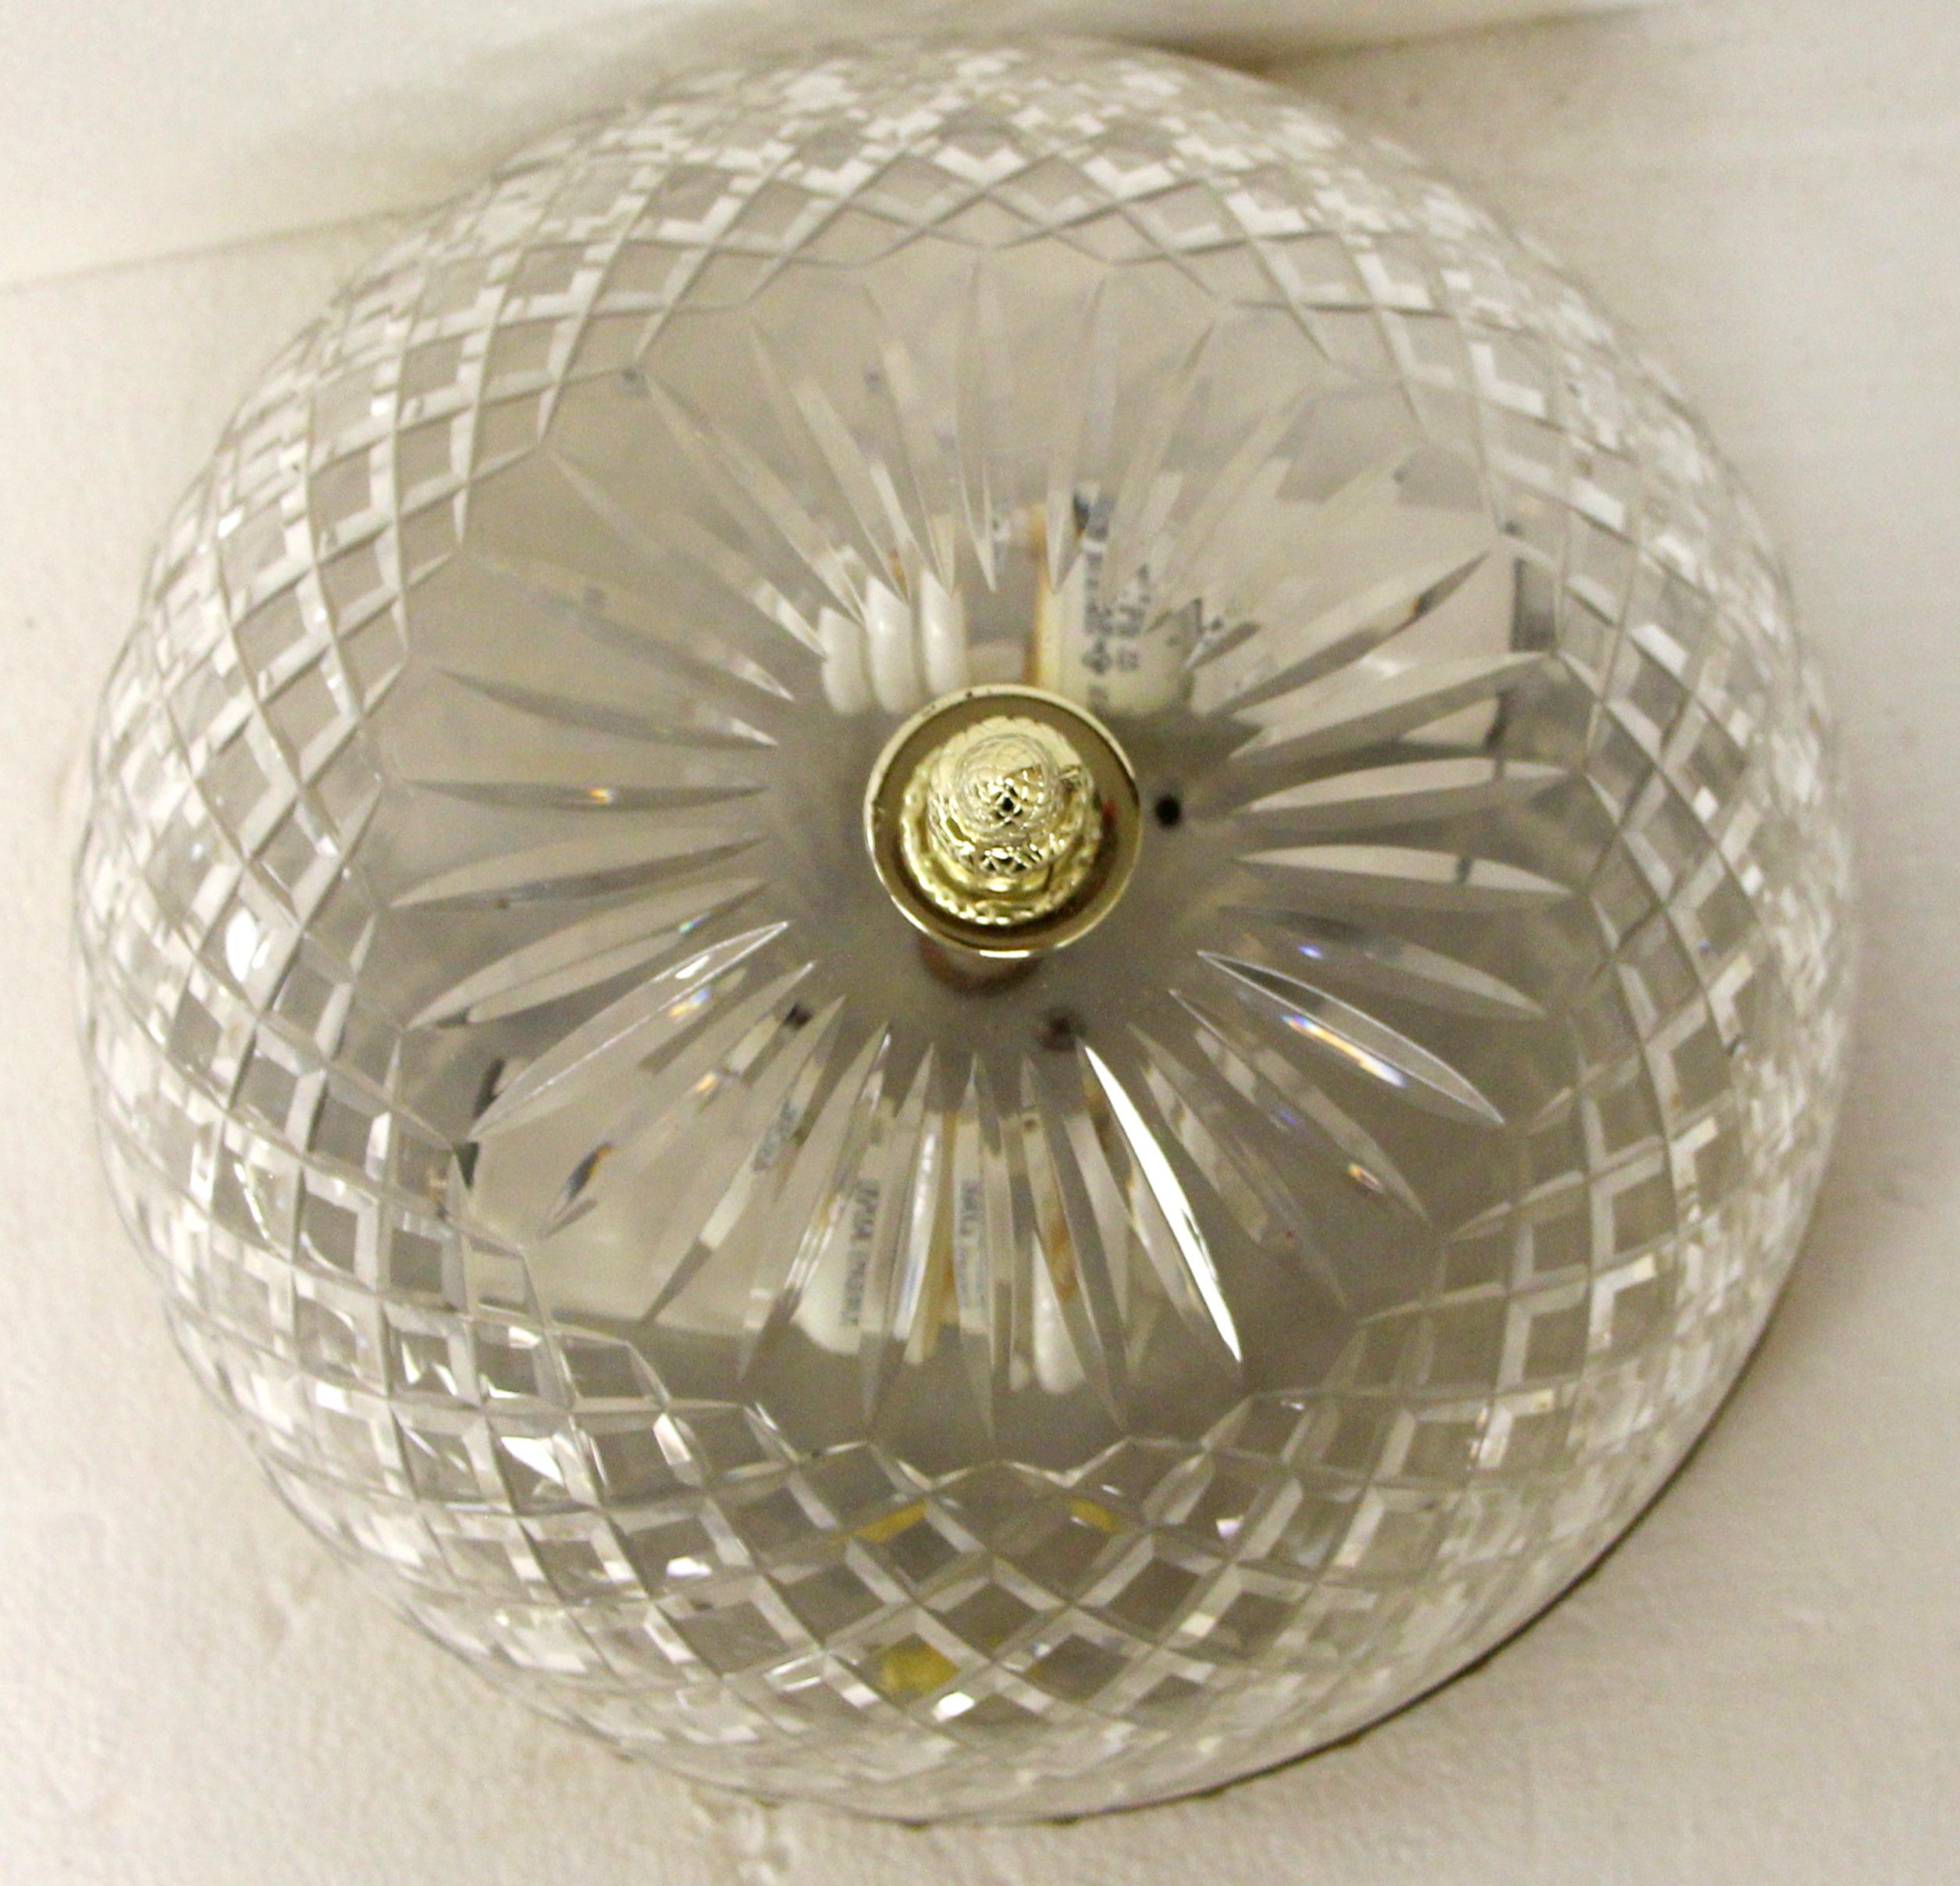 This large crystal flush mount light adorned many of the corridors of the NYC Waldorf Astoria Hotel. The shade is clear crystal and features a brass pineapple finial. A brass decorative rim completes the look. Waldorf Astoria authenticity card